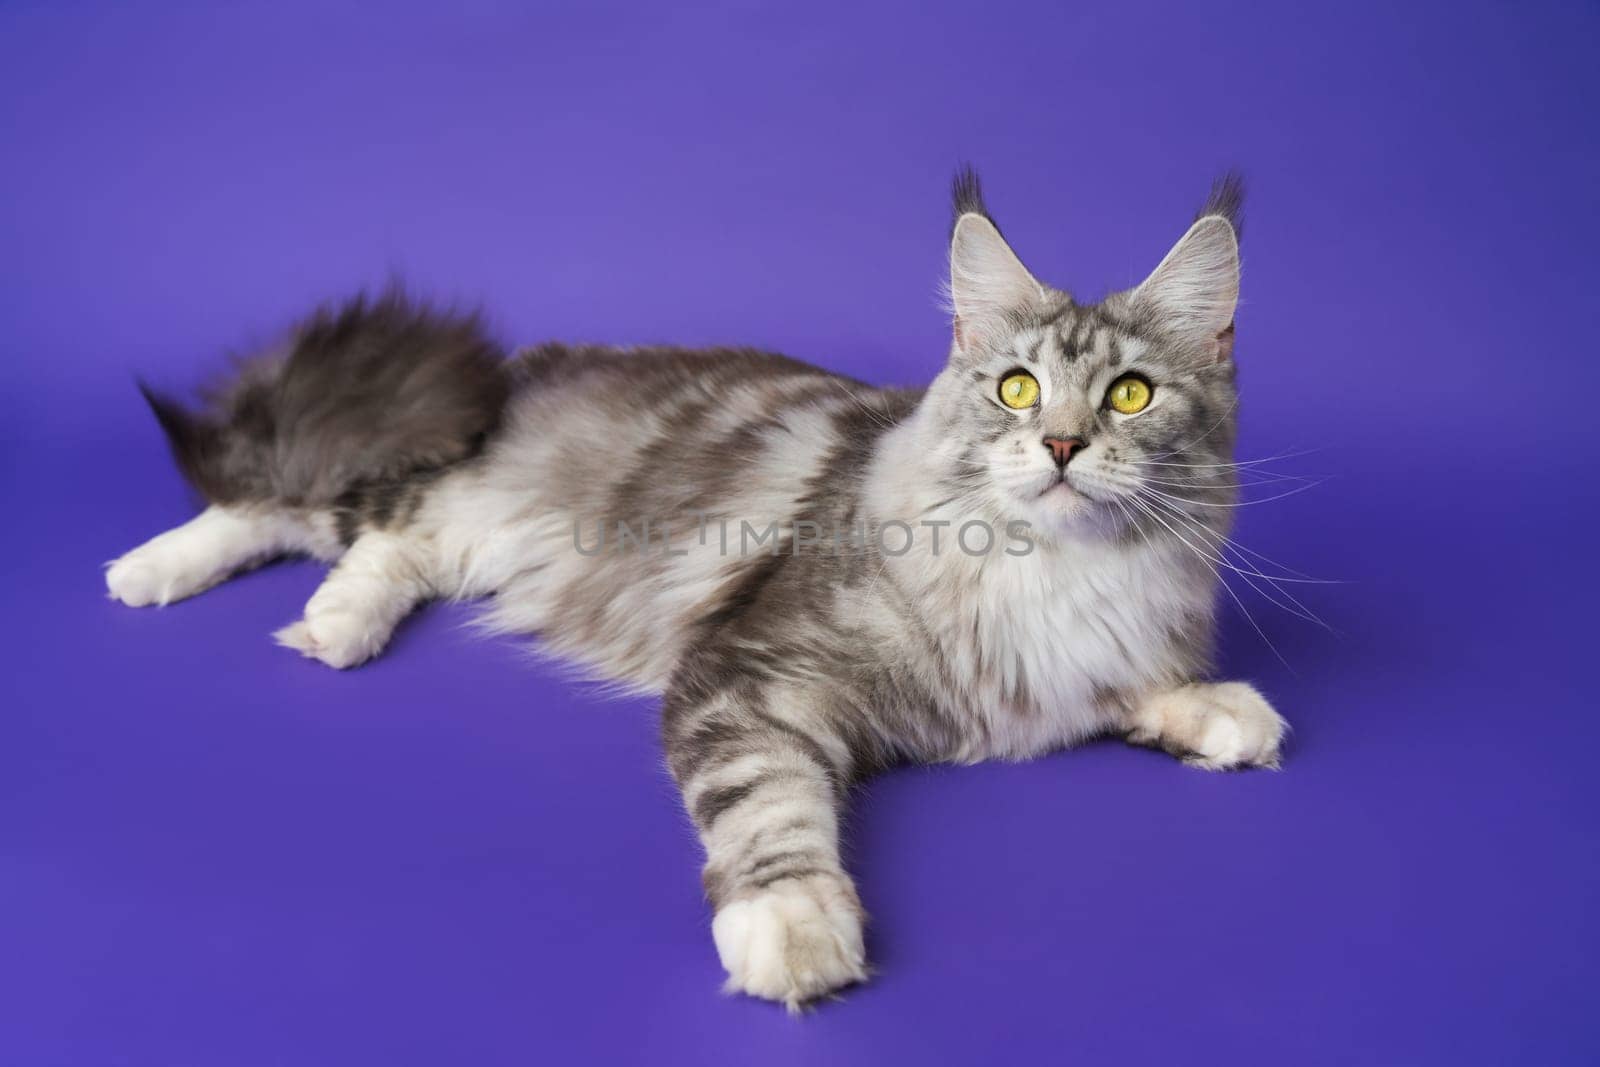 High angle view of American Forest Cat black silver classic tabby and white color lying down on blue background, looking at camera. Part of series of photos cute kitten one year old with yellow eyes